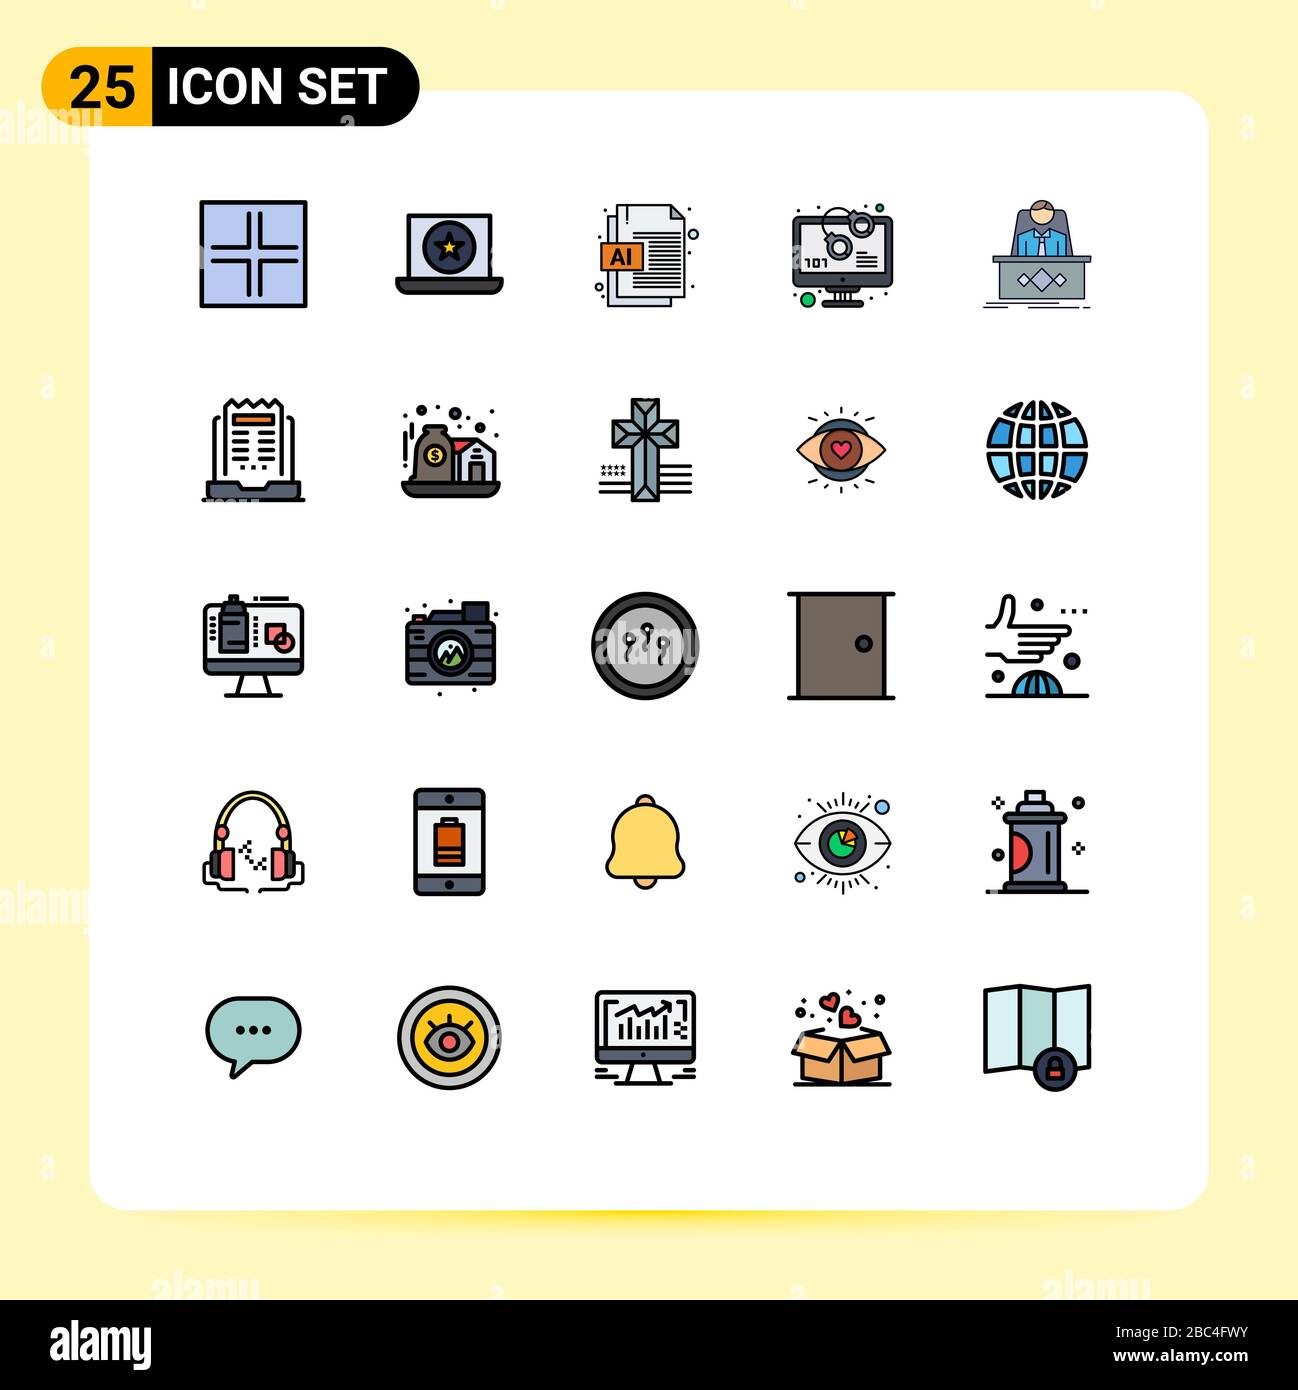 25 Creative Icons Modern Signs and Symbols of boss, theft, ai, warn, secured Editable Vector Design Elements Stock Vector